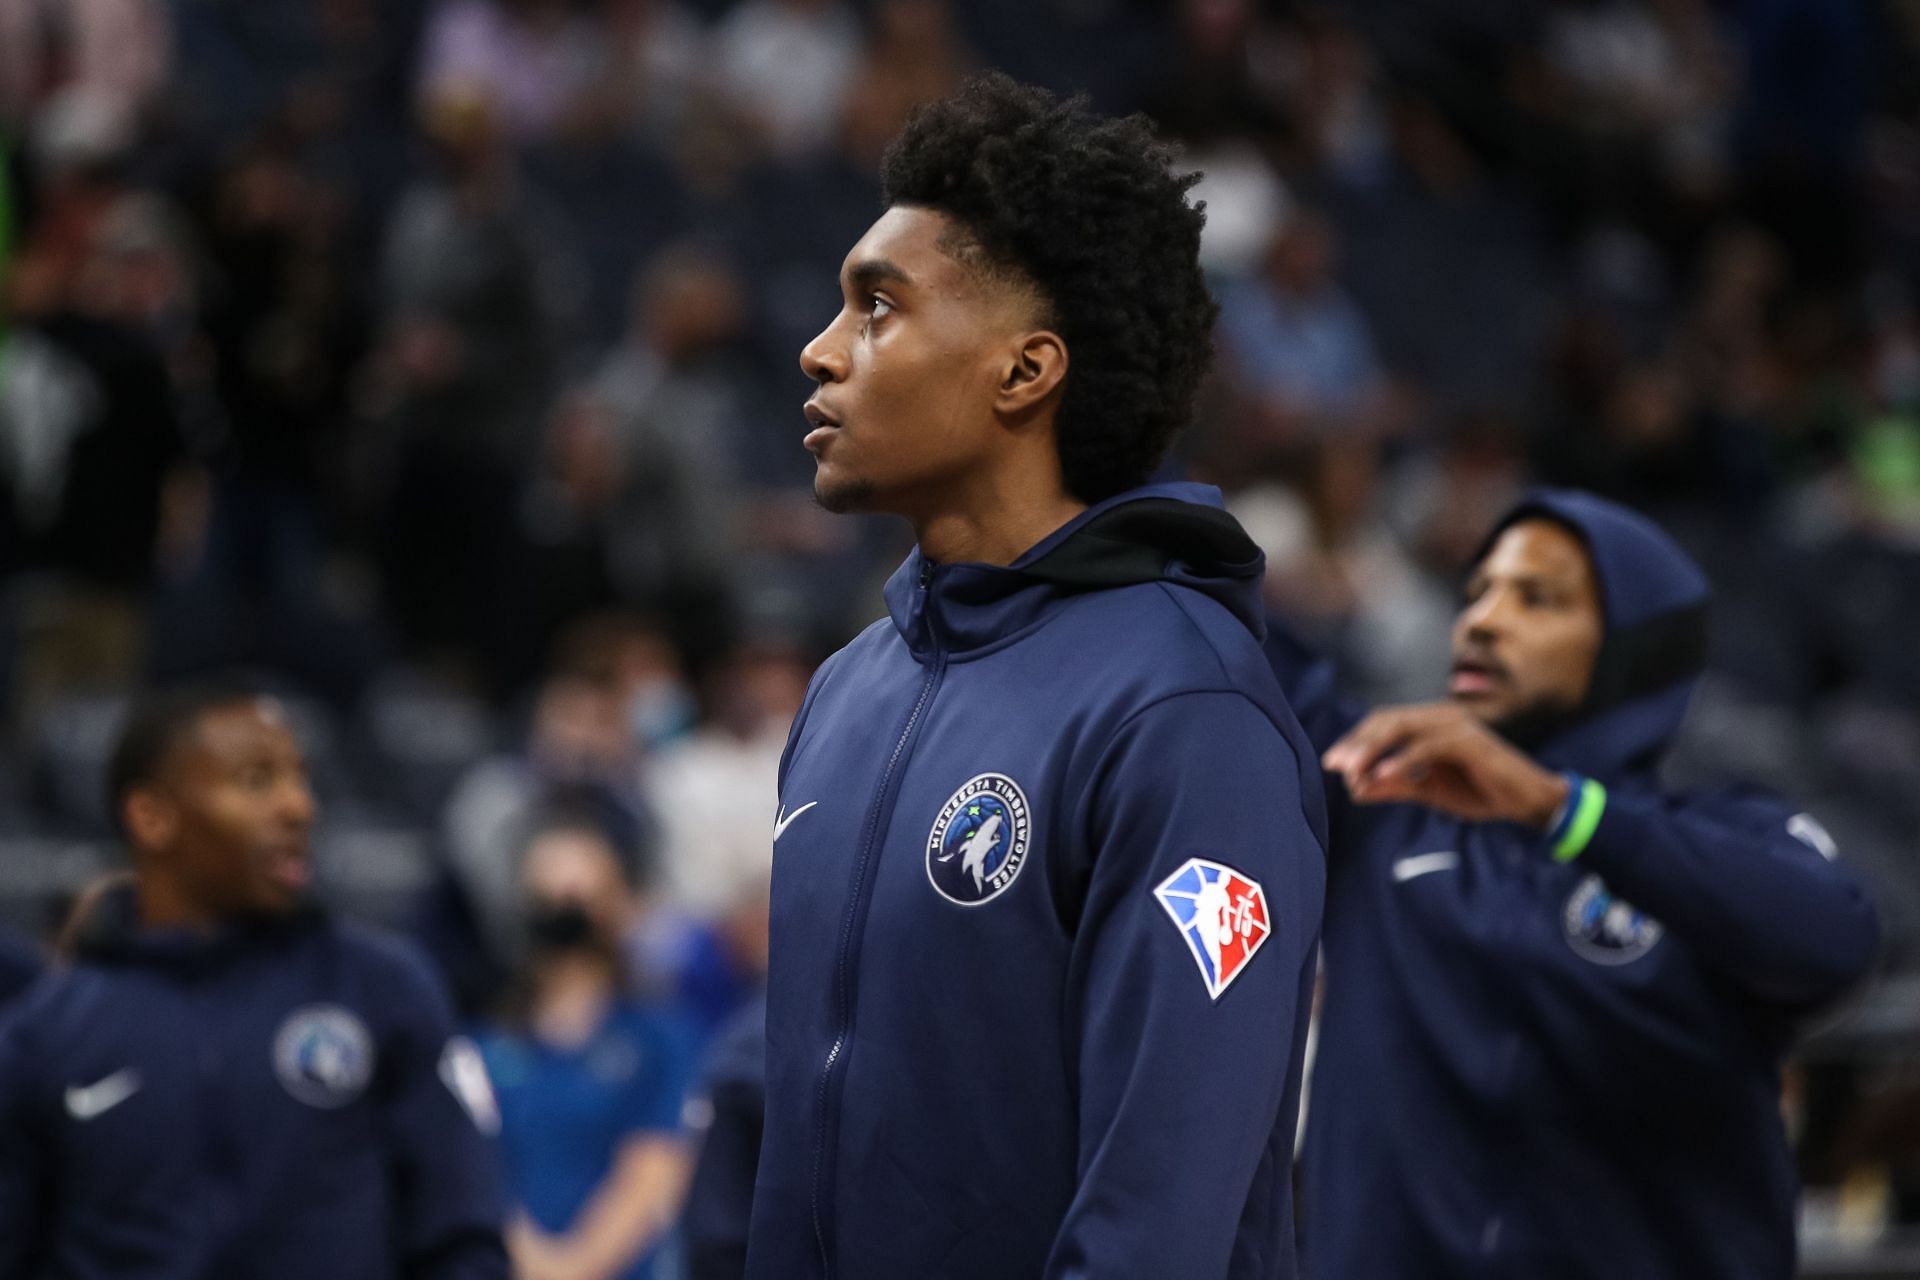 Jaden McDaniels warms up before of a Minnesota Timberwolves game